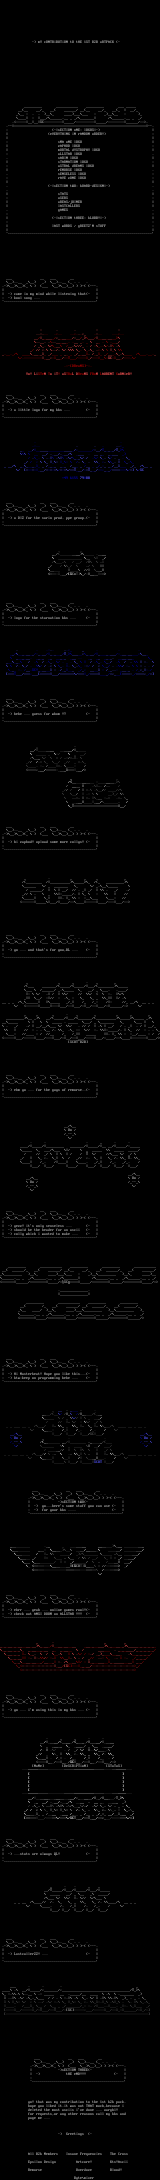 ASCii COLLY #1 by Scot